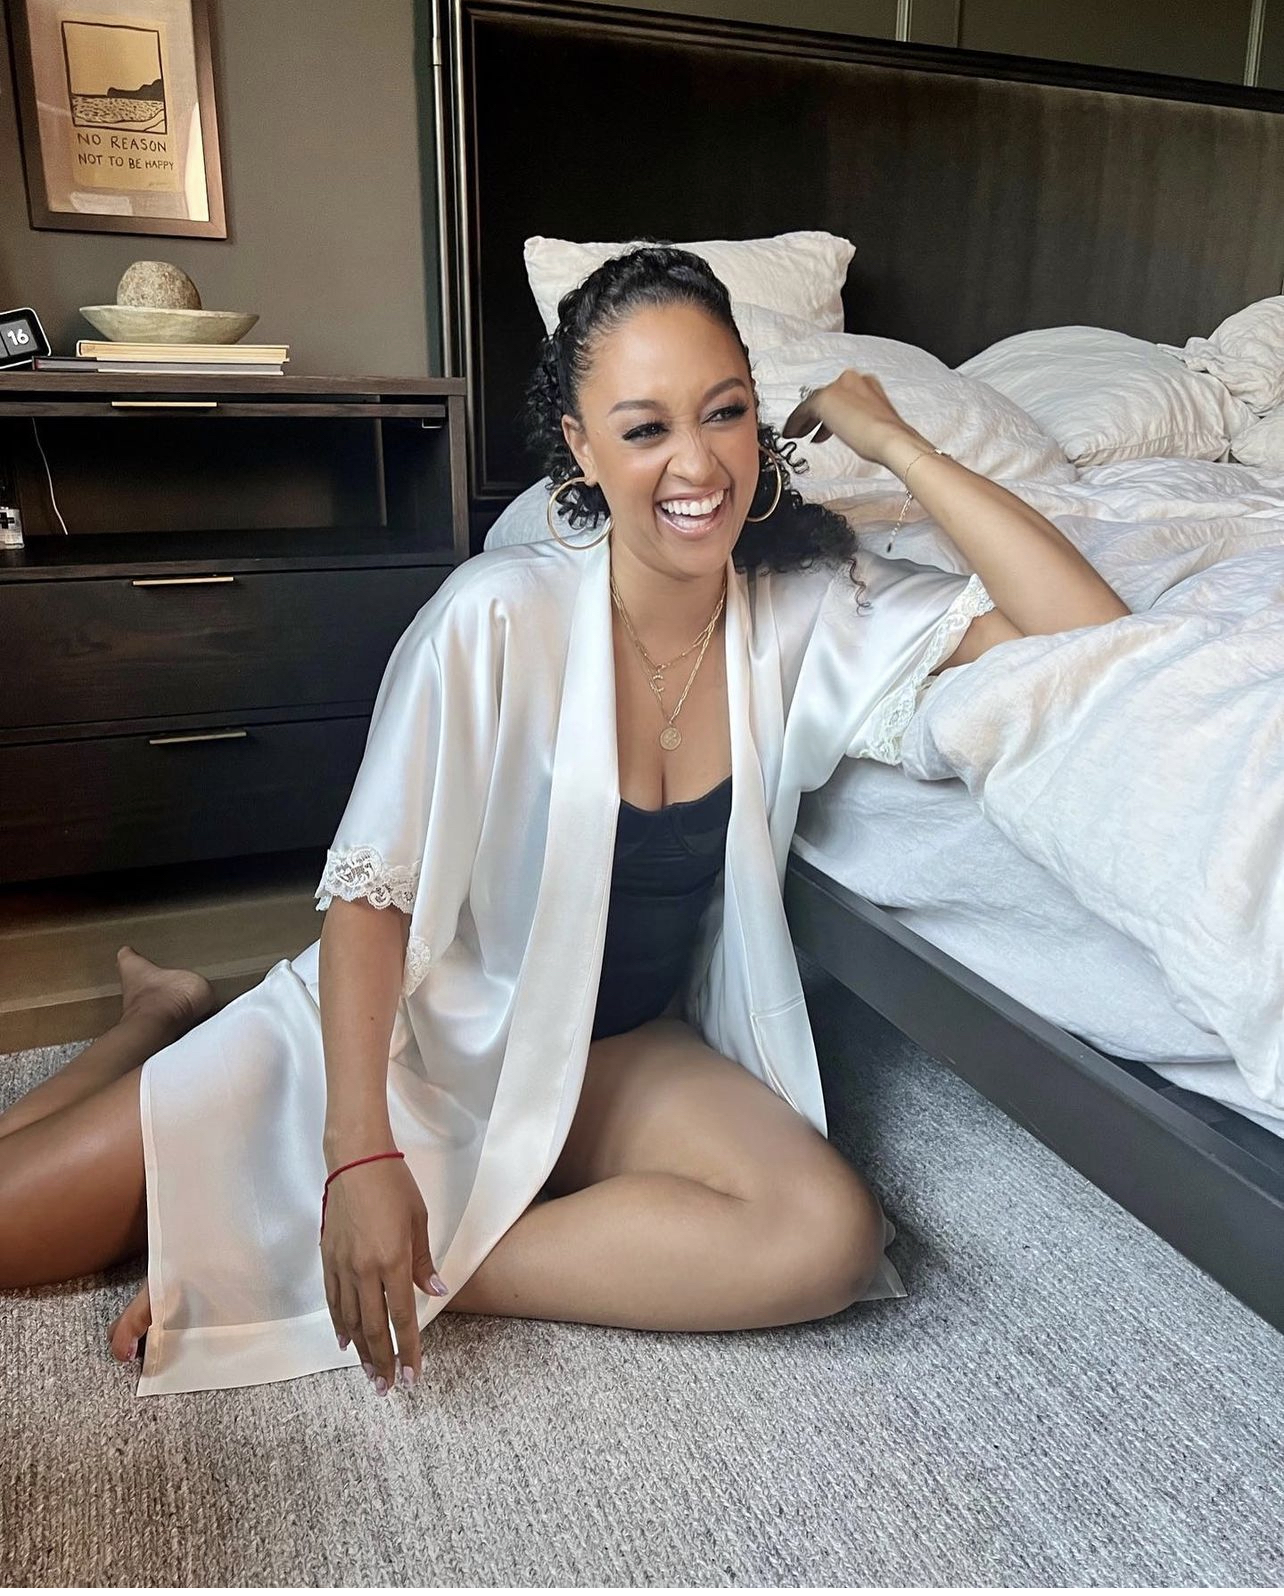 Tia Mowry Says She Views Her split From Corey Hardict As A
“Celebration” Rather Than A ‘Failure’